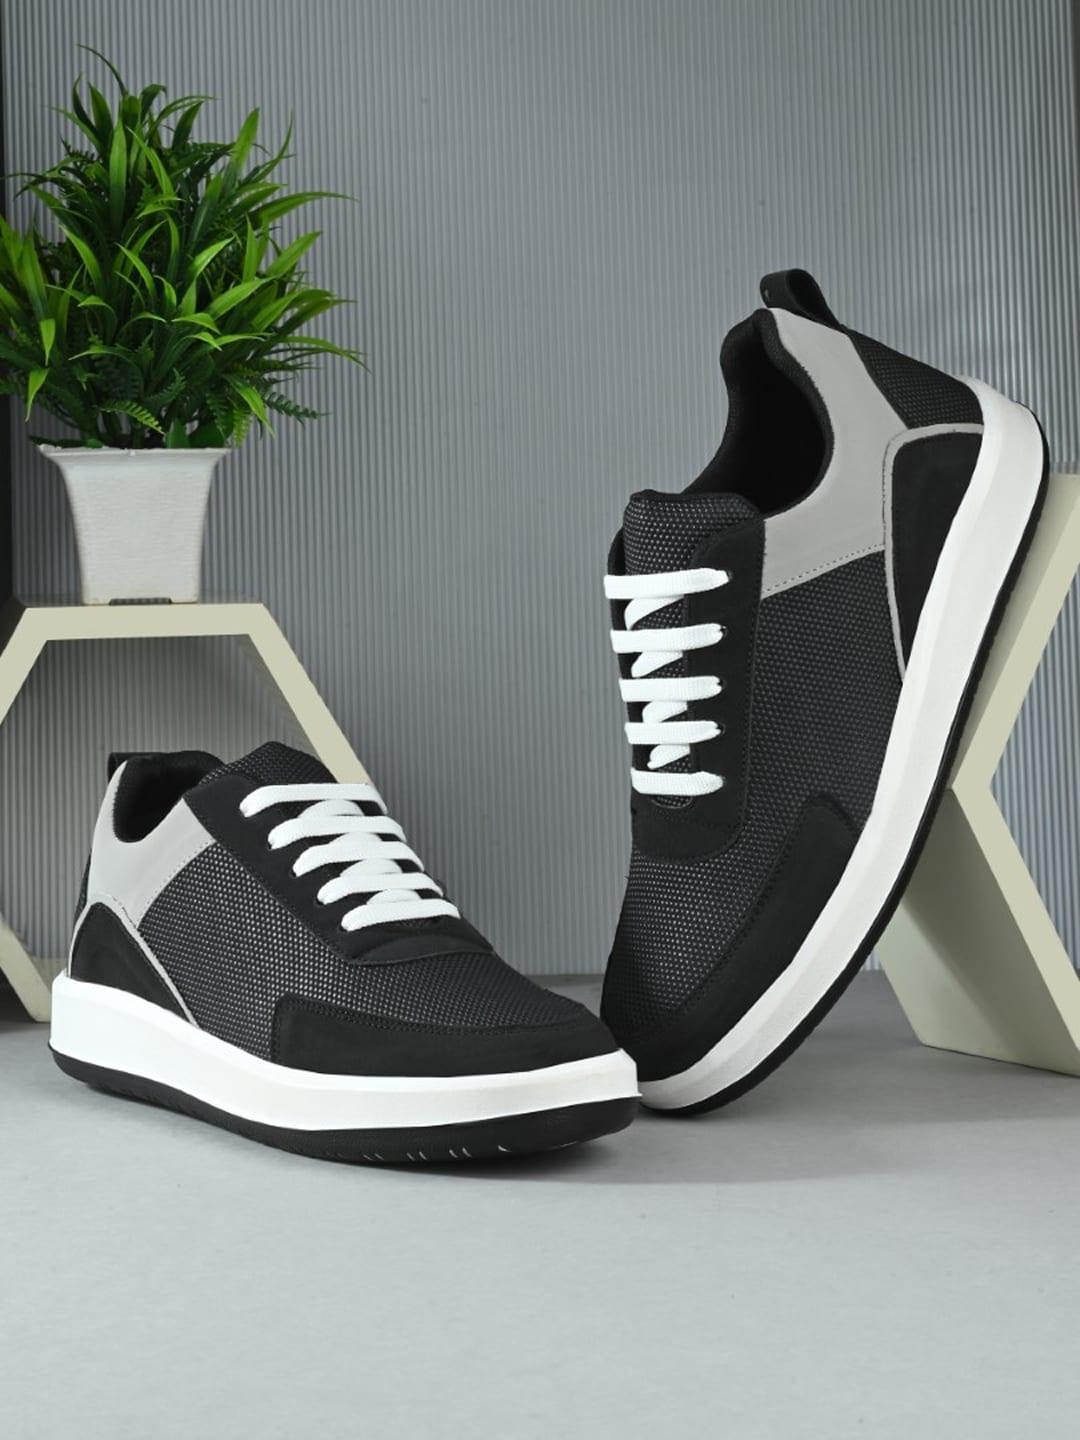 The Roadster Lifestyle Co. Men Black & White Colourblocked Lightweight Sneakers